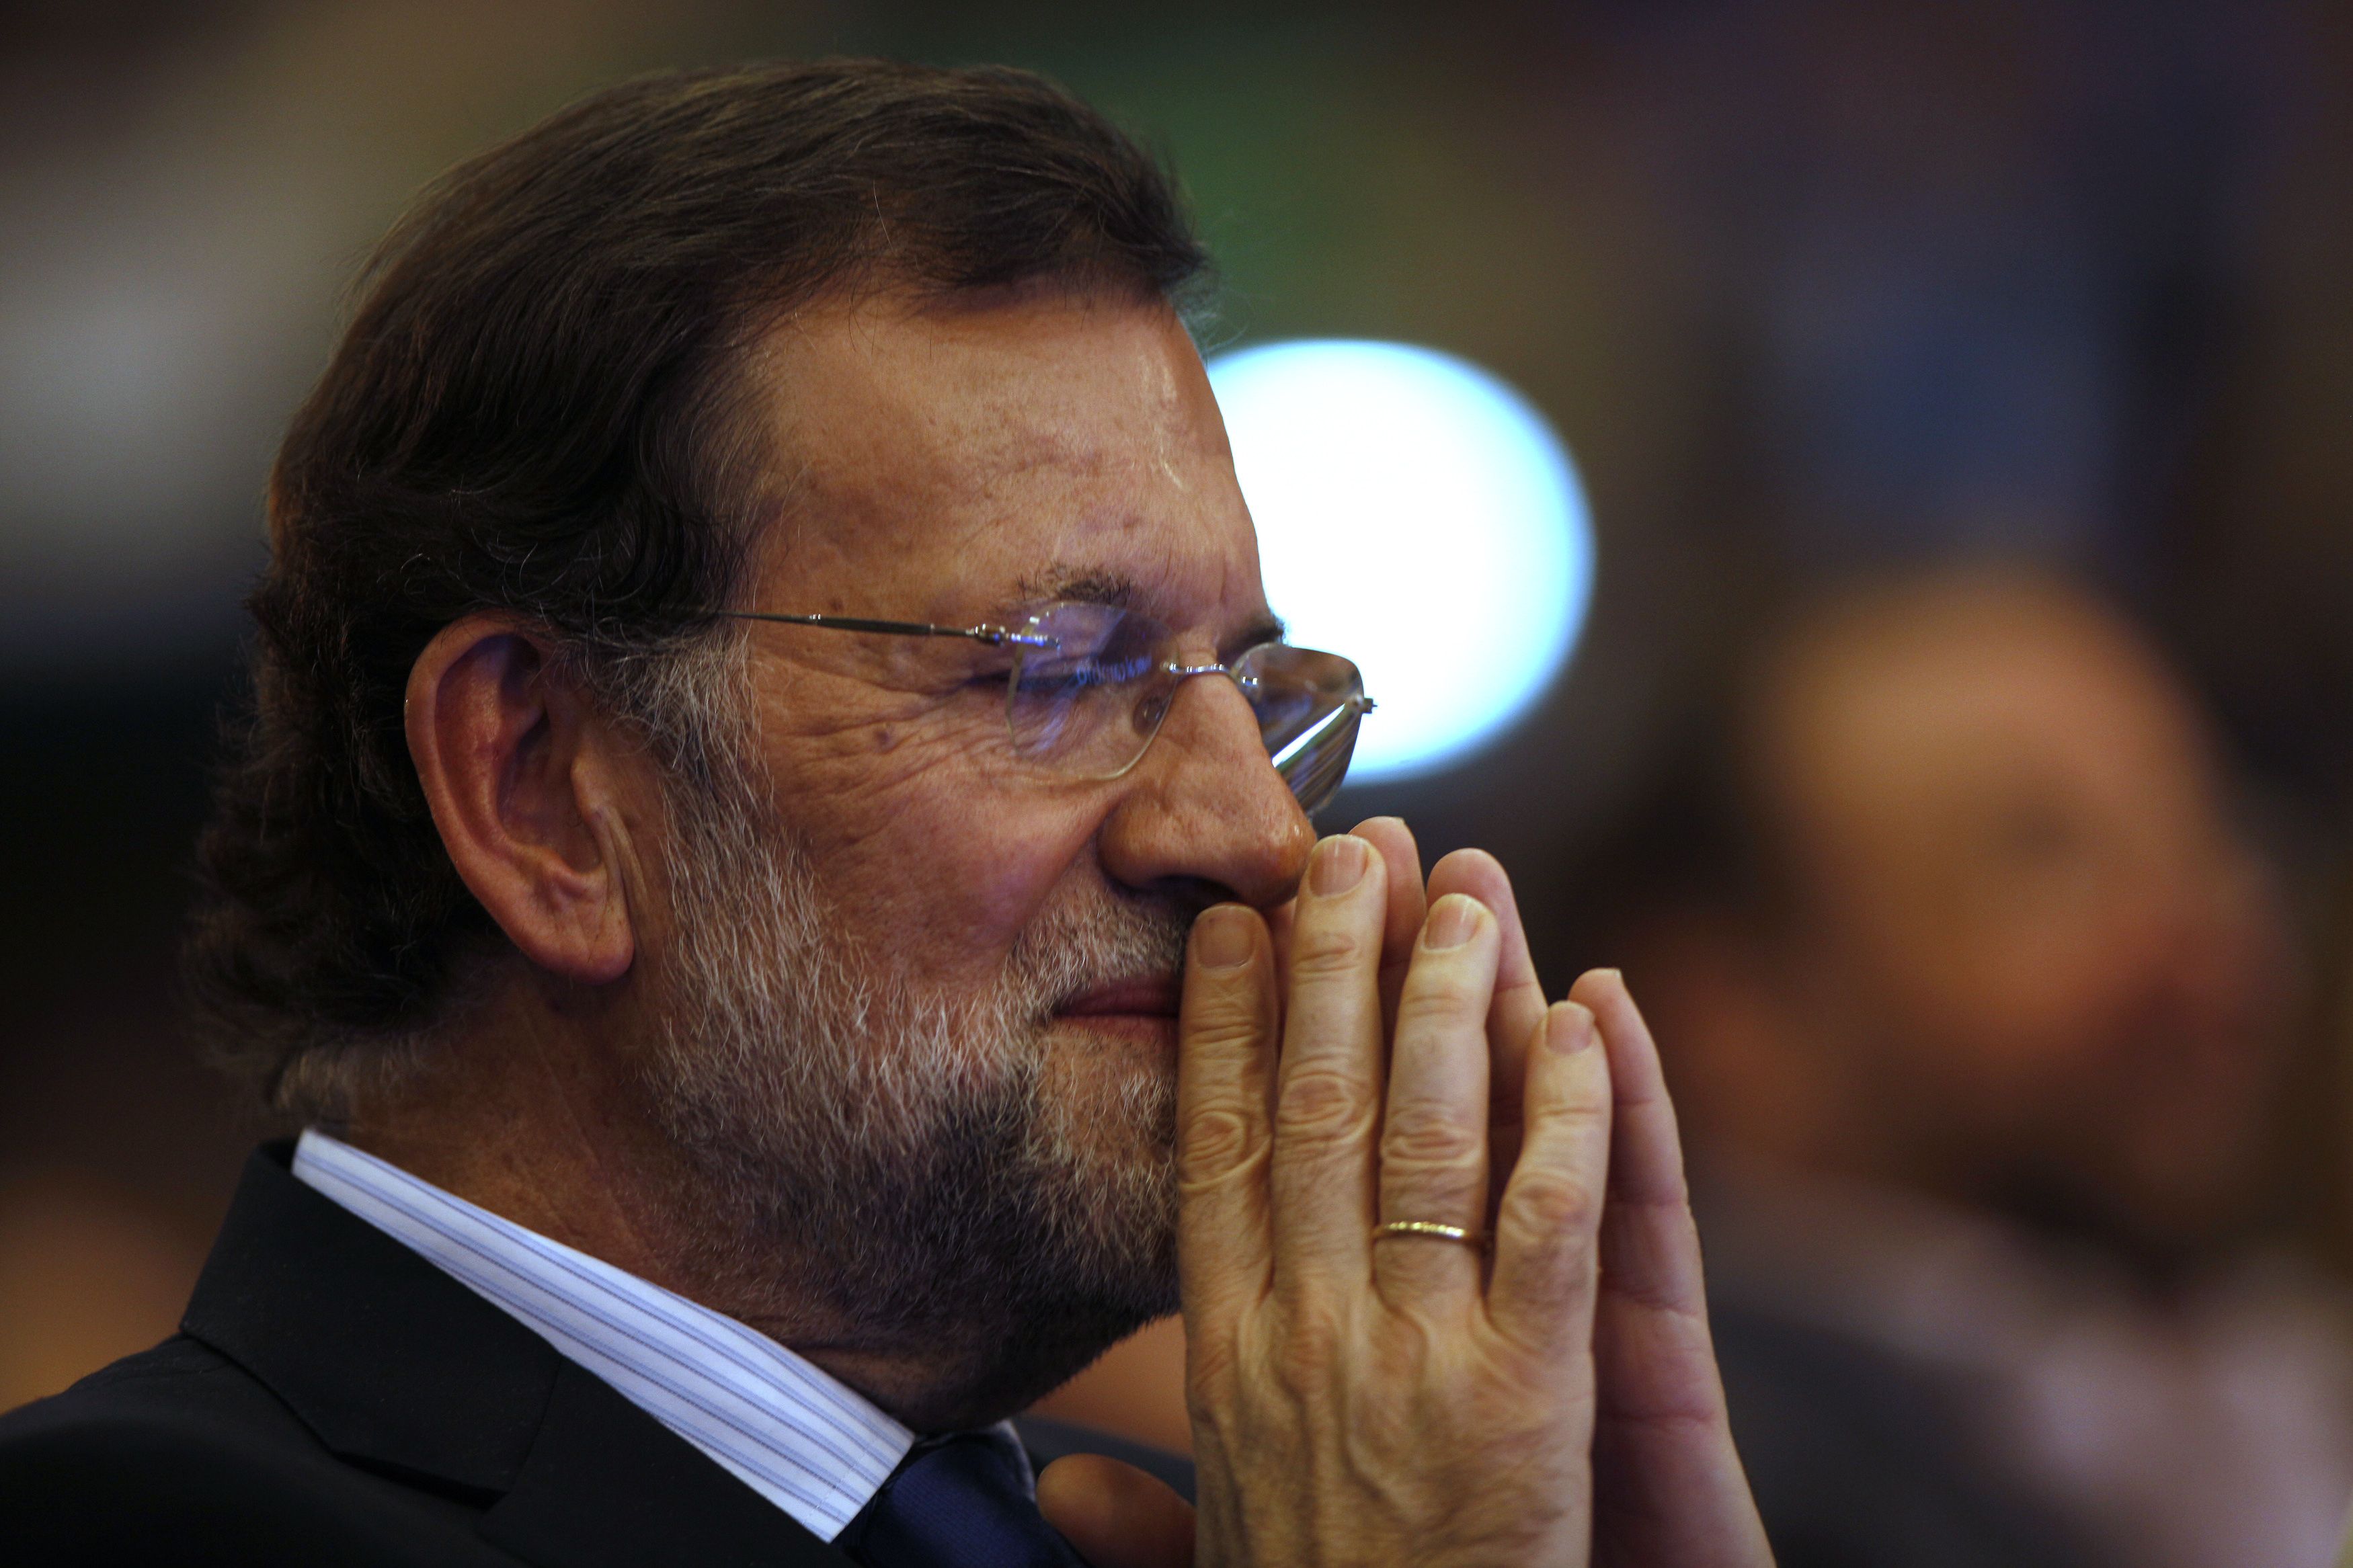 Mariano Rajoy, the leader of Spain's centre-right opposition People's Party gestures during a electoral campaign rally in Malaga